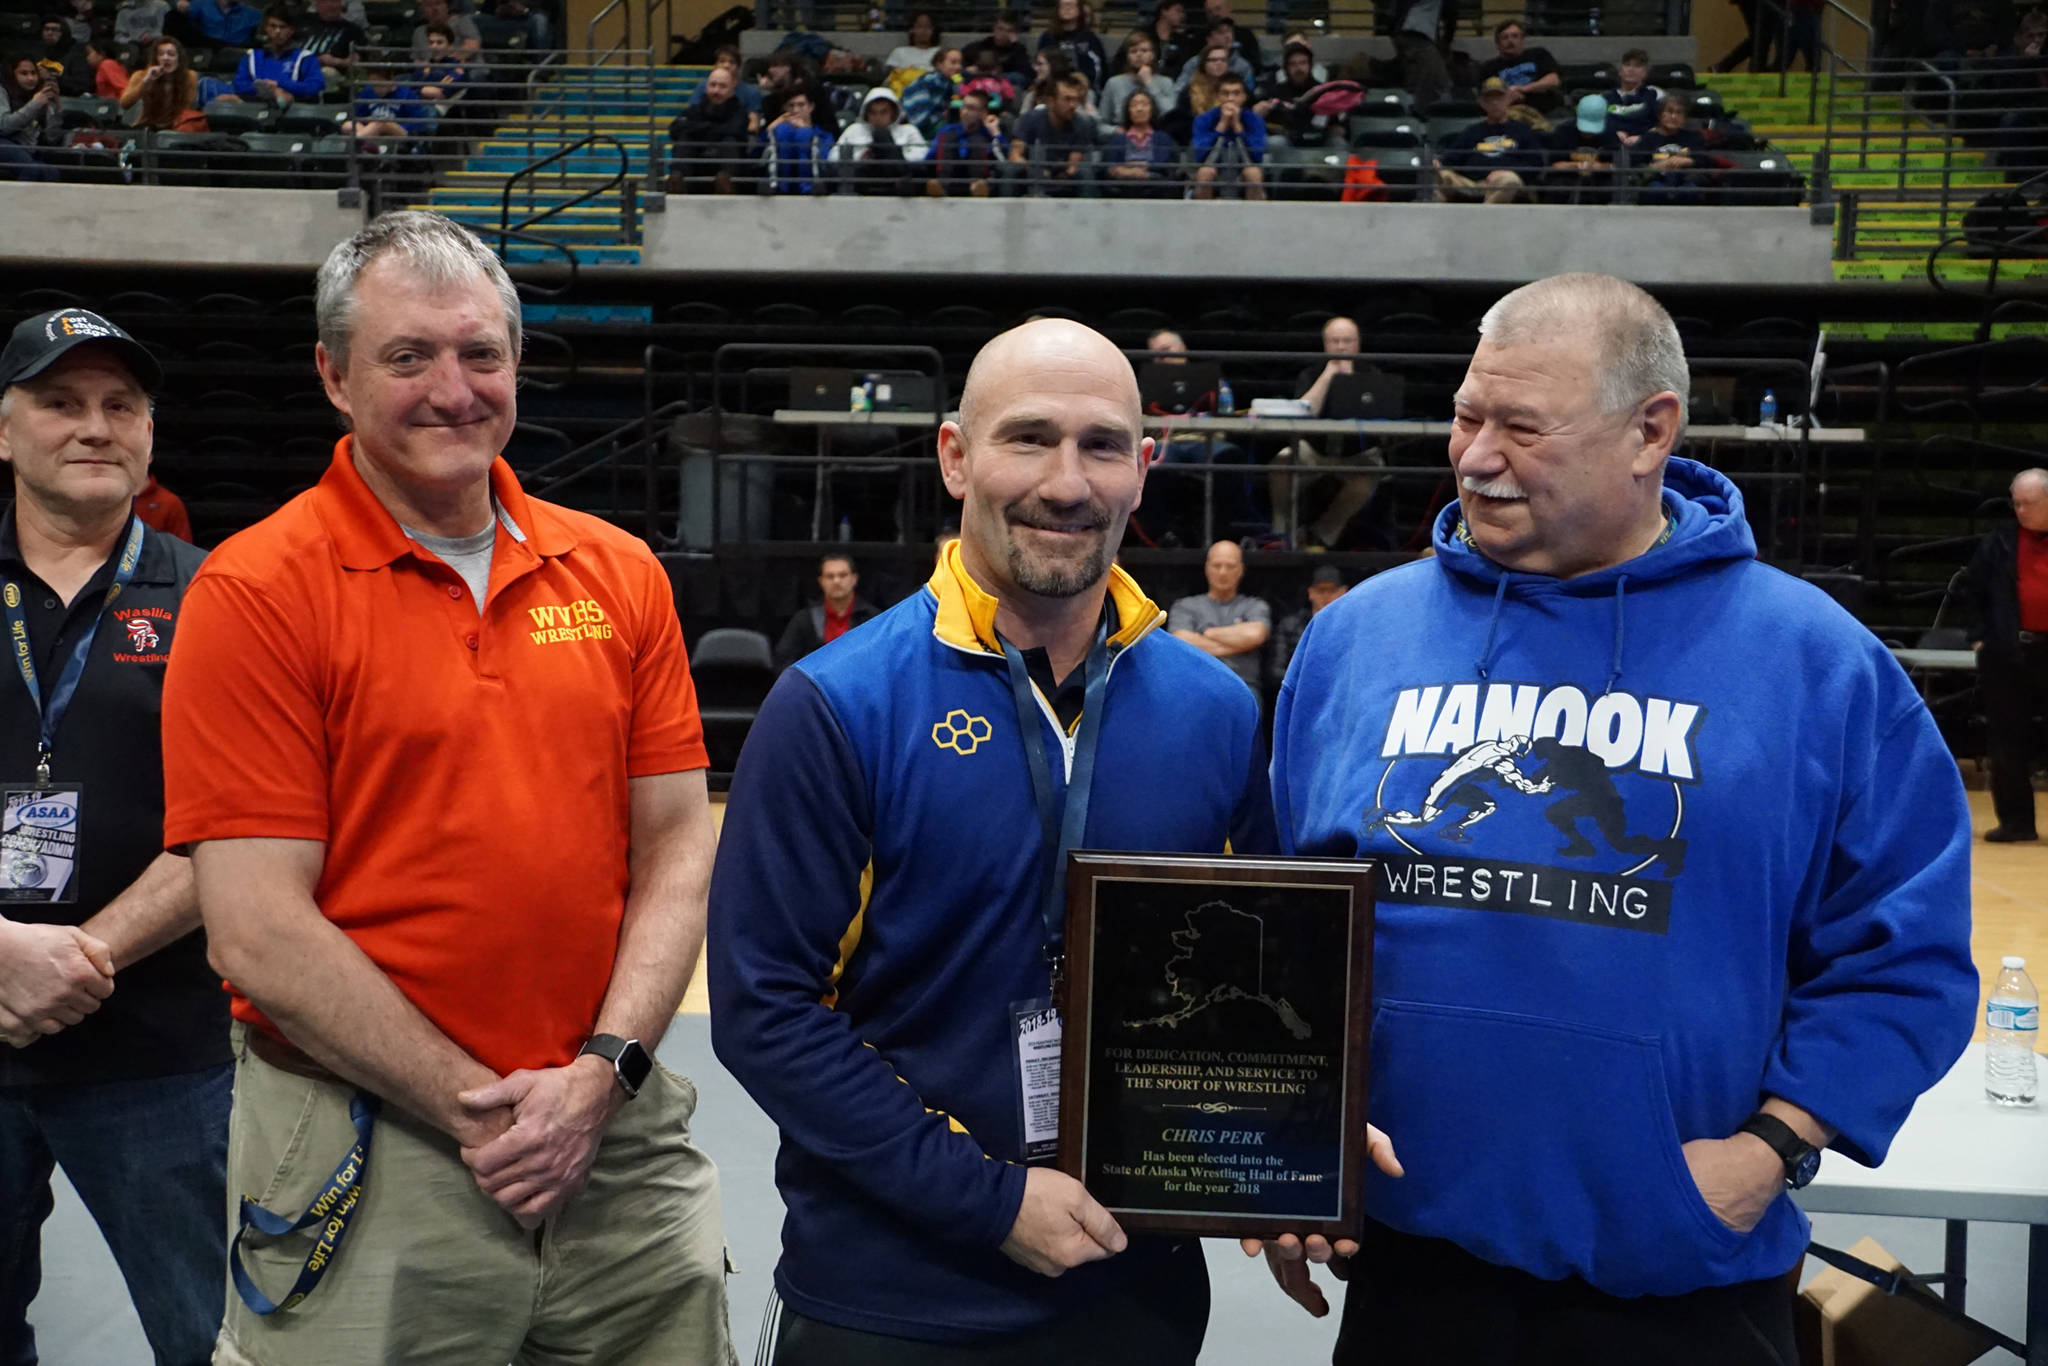 Homer High School Athletic Director Chis Perk, center, is inducted into the Alaska Wrestling Hall of Fame on Dec. 15, 2018 at the Alaska Airlines Center in Anchorage, Alaska. (Photo courtesy Alaska Schools Activity Association)